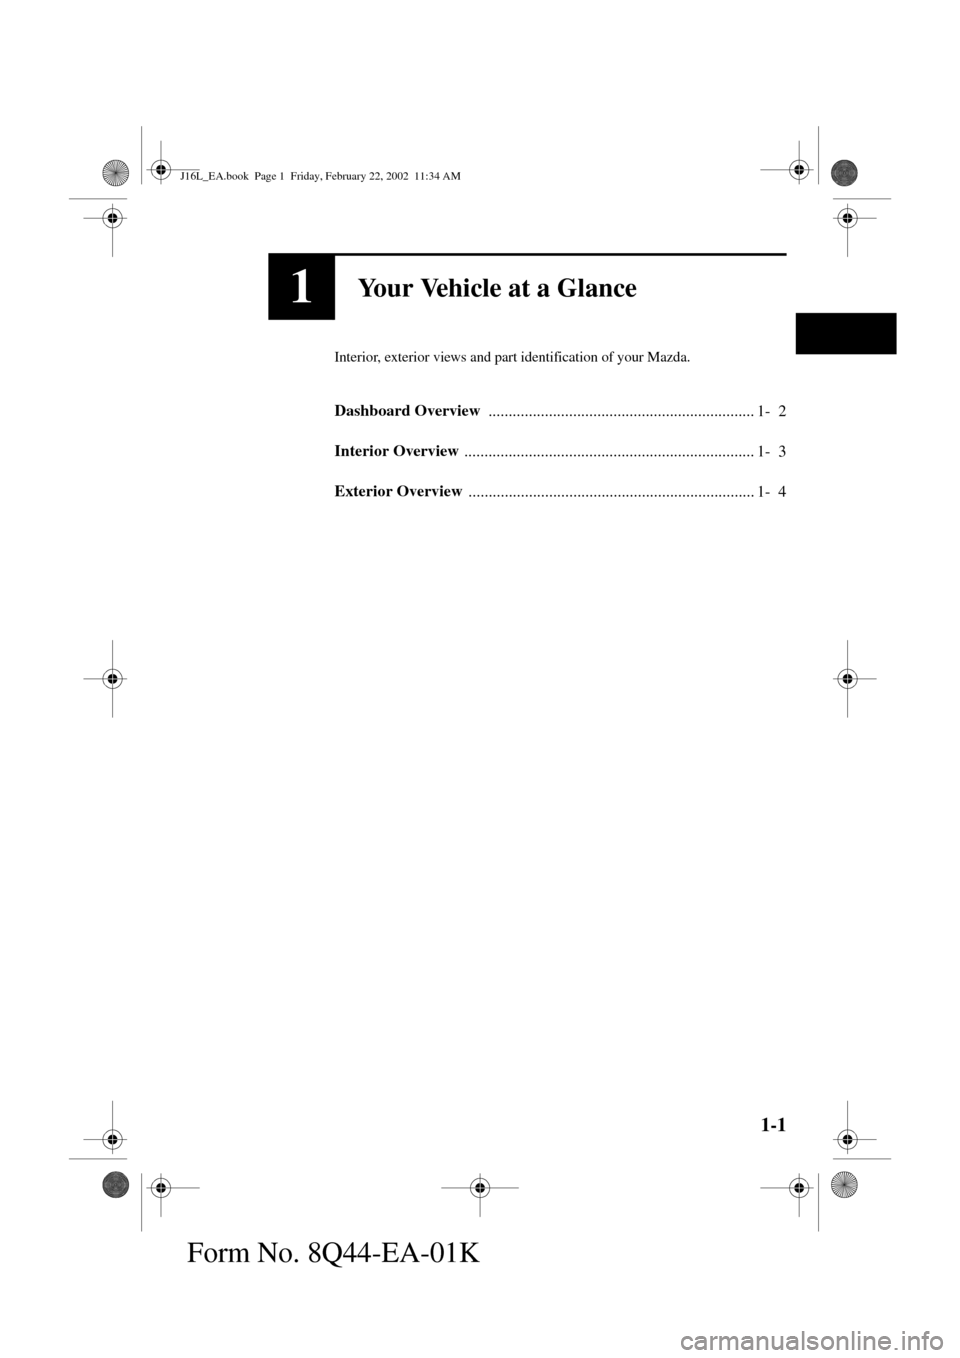 MAZDA MODEL MPV 2002  Owners Manual (in English) 1-1
Form No. 8Q44-EA-01K
1Your Vehicle at a Glance
Interior, exterior views and part identification of your Mazda.
Dashboard Overview 
.................................................................